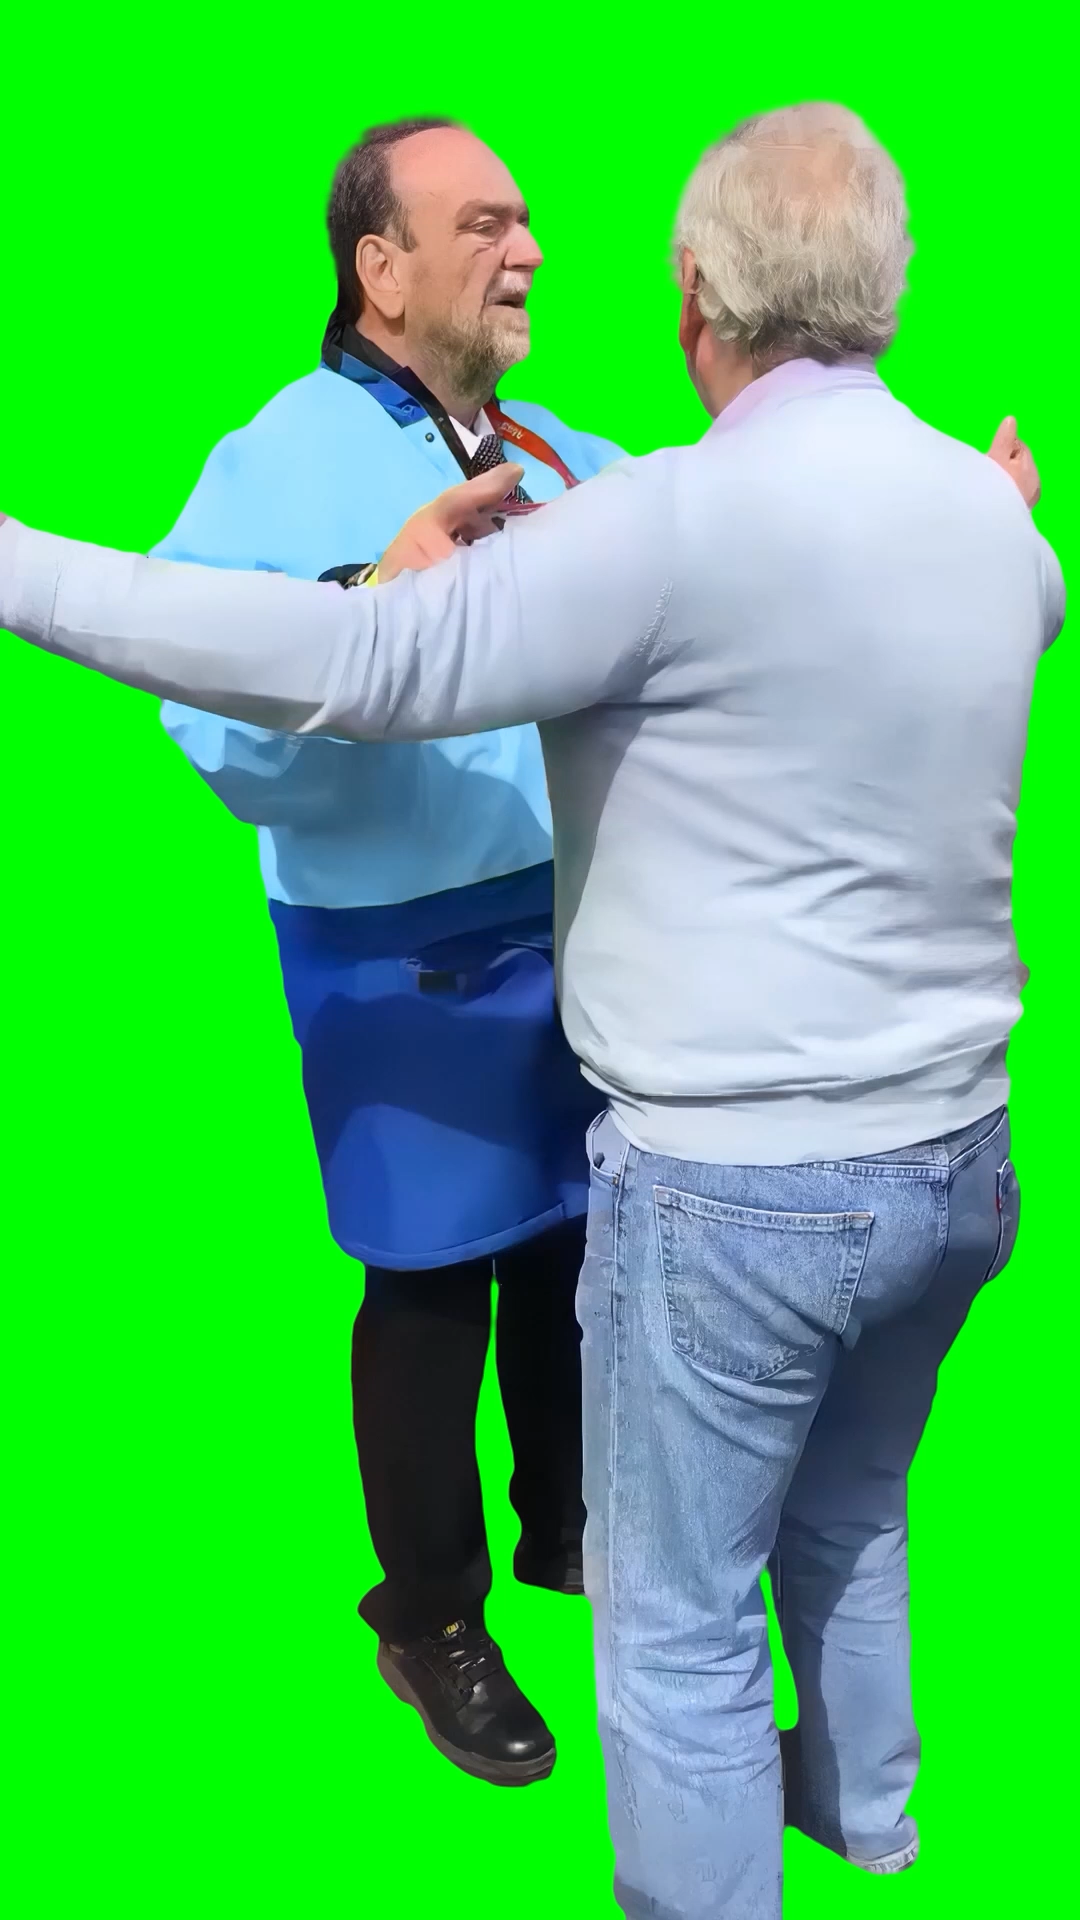 Security guard letting people in easily without inspection meme (Green Screen)